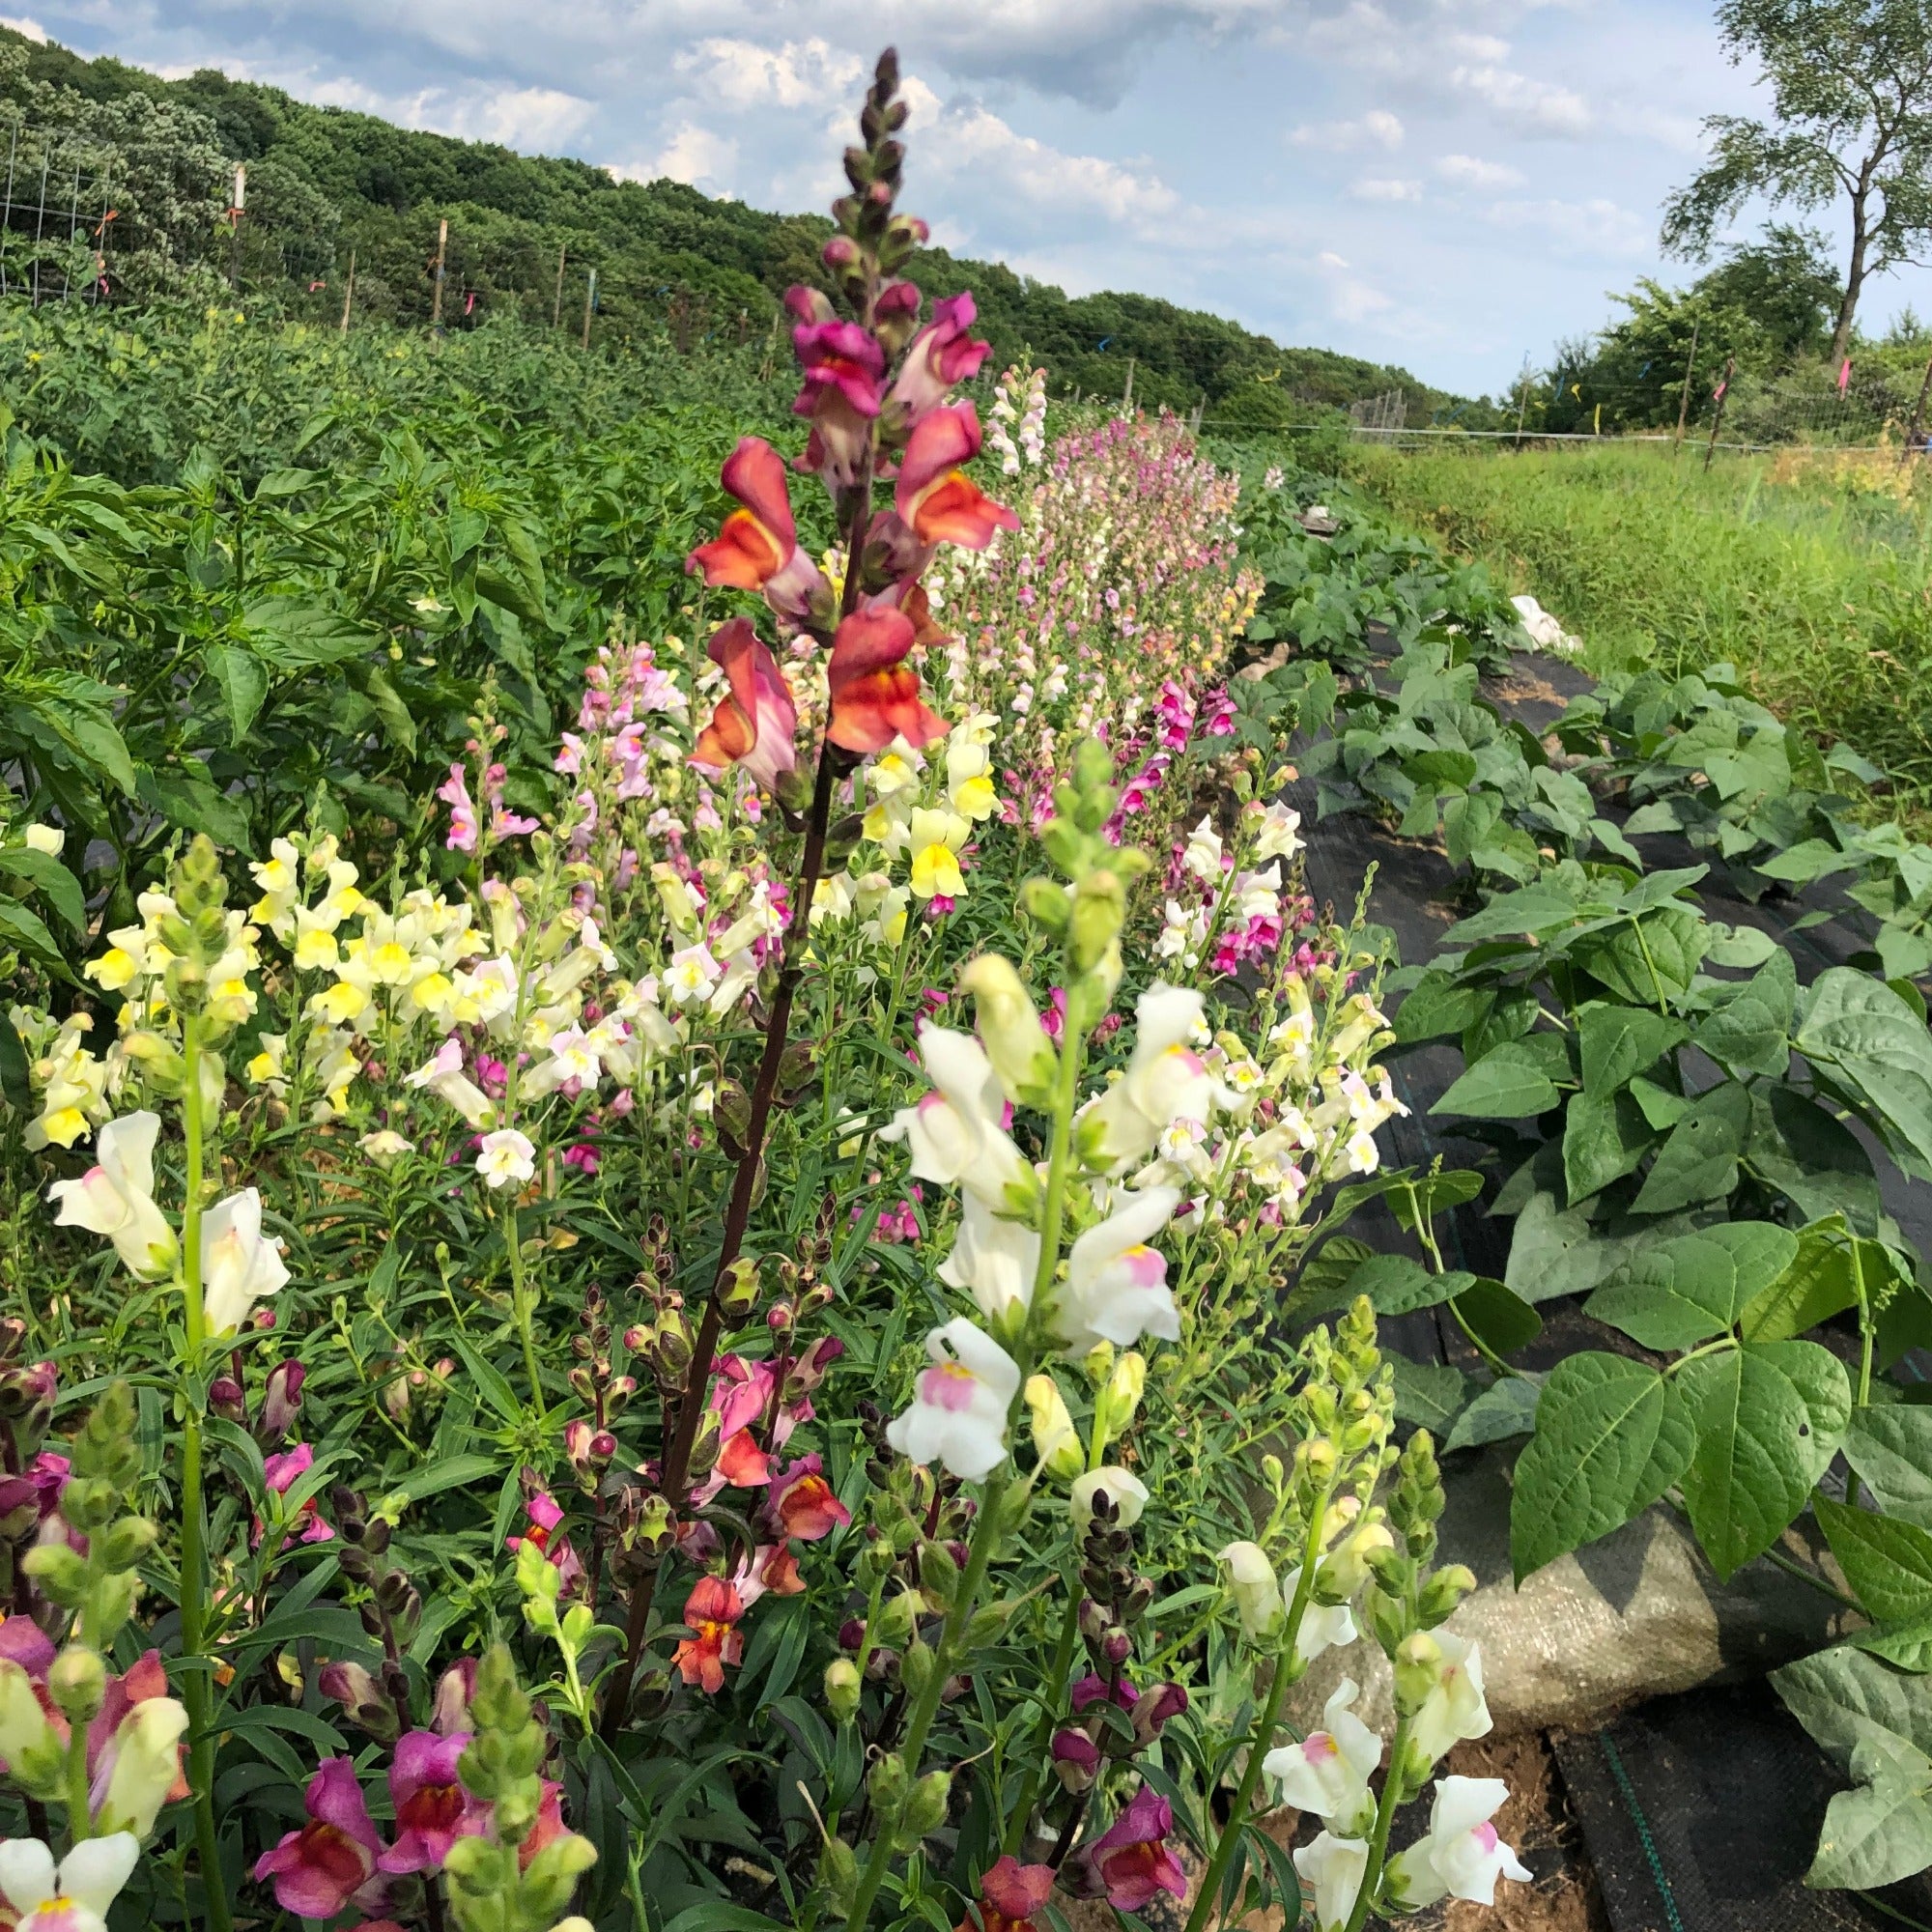 Tetra Snapdragon mix bed with many blooms in a garden